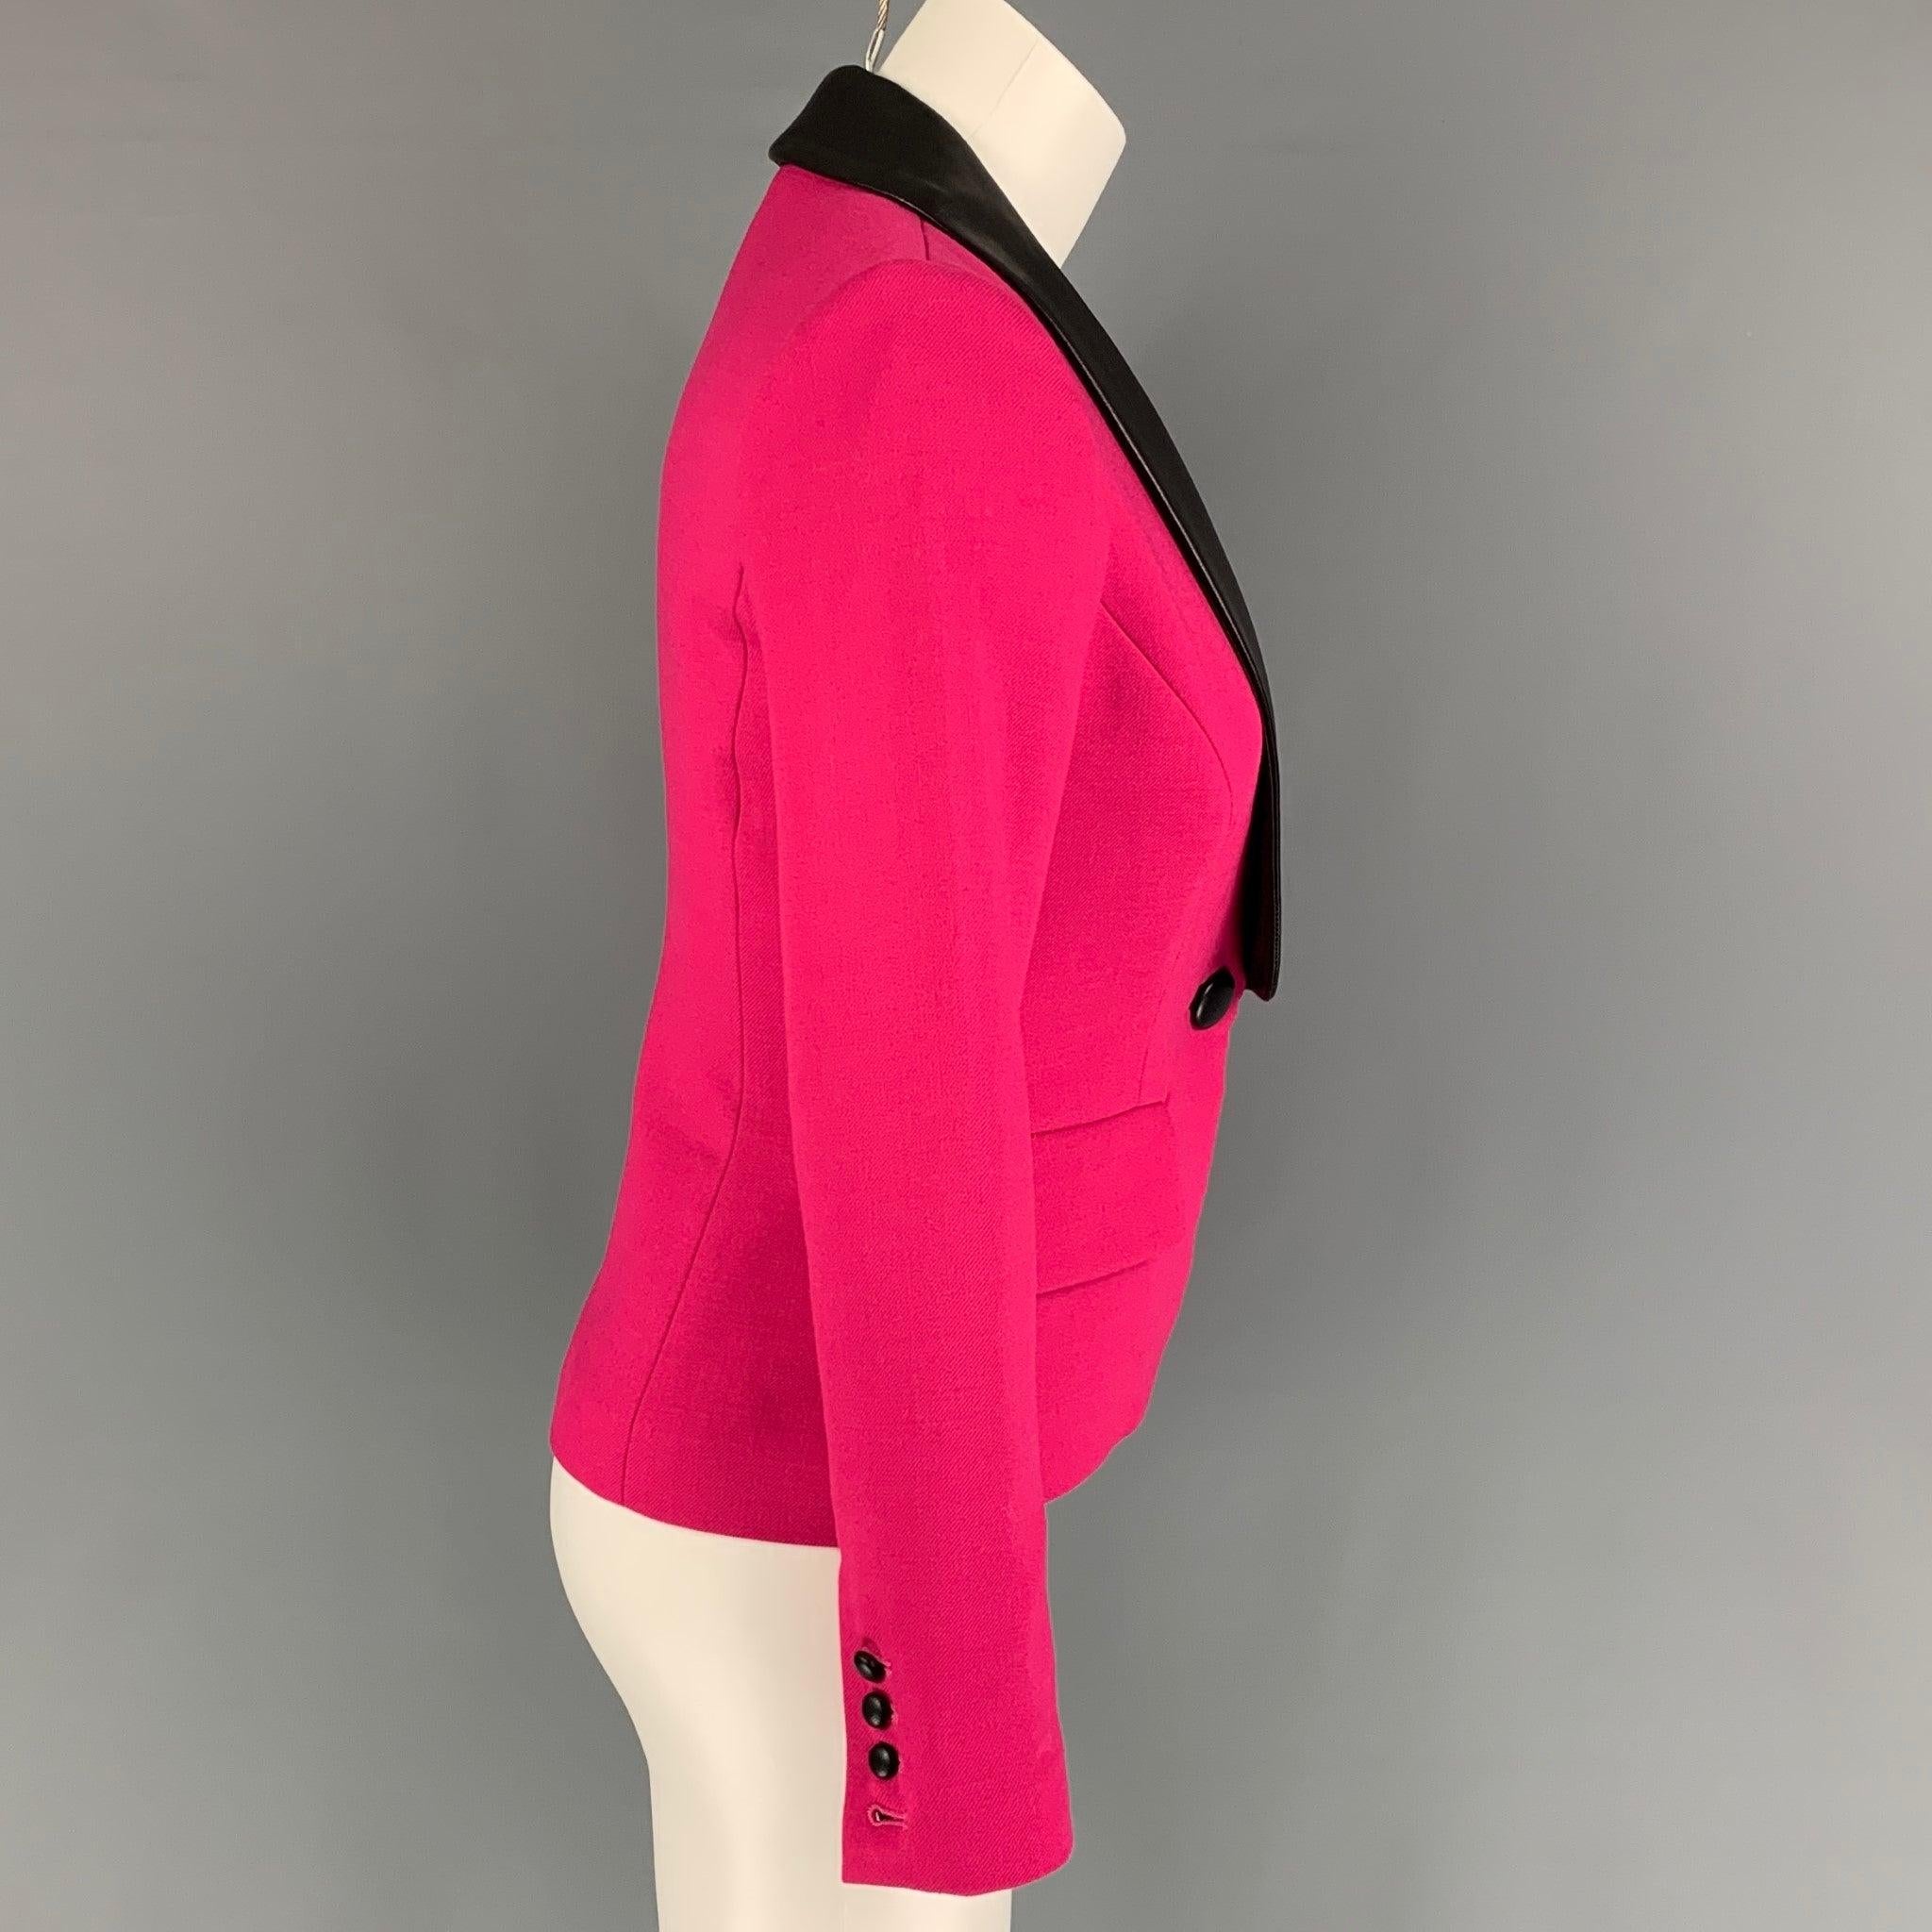 MILLY blazer comes in a fuchsia wool featuring a black leather shawl lapel, flap pockets, and a single button closure. Made in USA.
New With Tags.
 

Marked:   0 

Measurements: 
 
Shoulder: 14 inches  Bust: 32 inches  Sleeve:
24 inches Length: 21.5